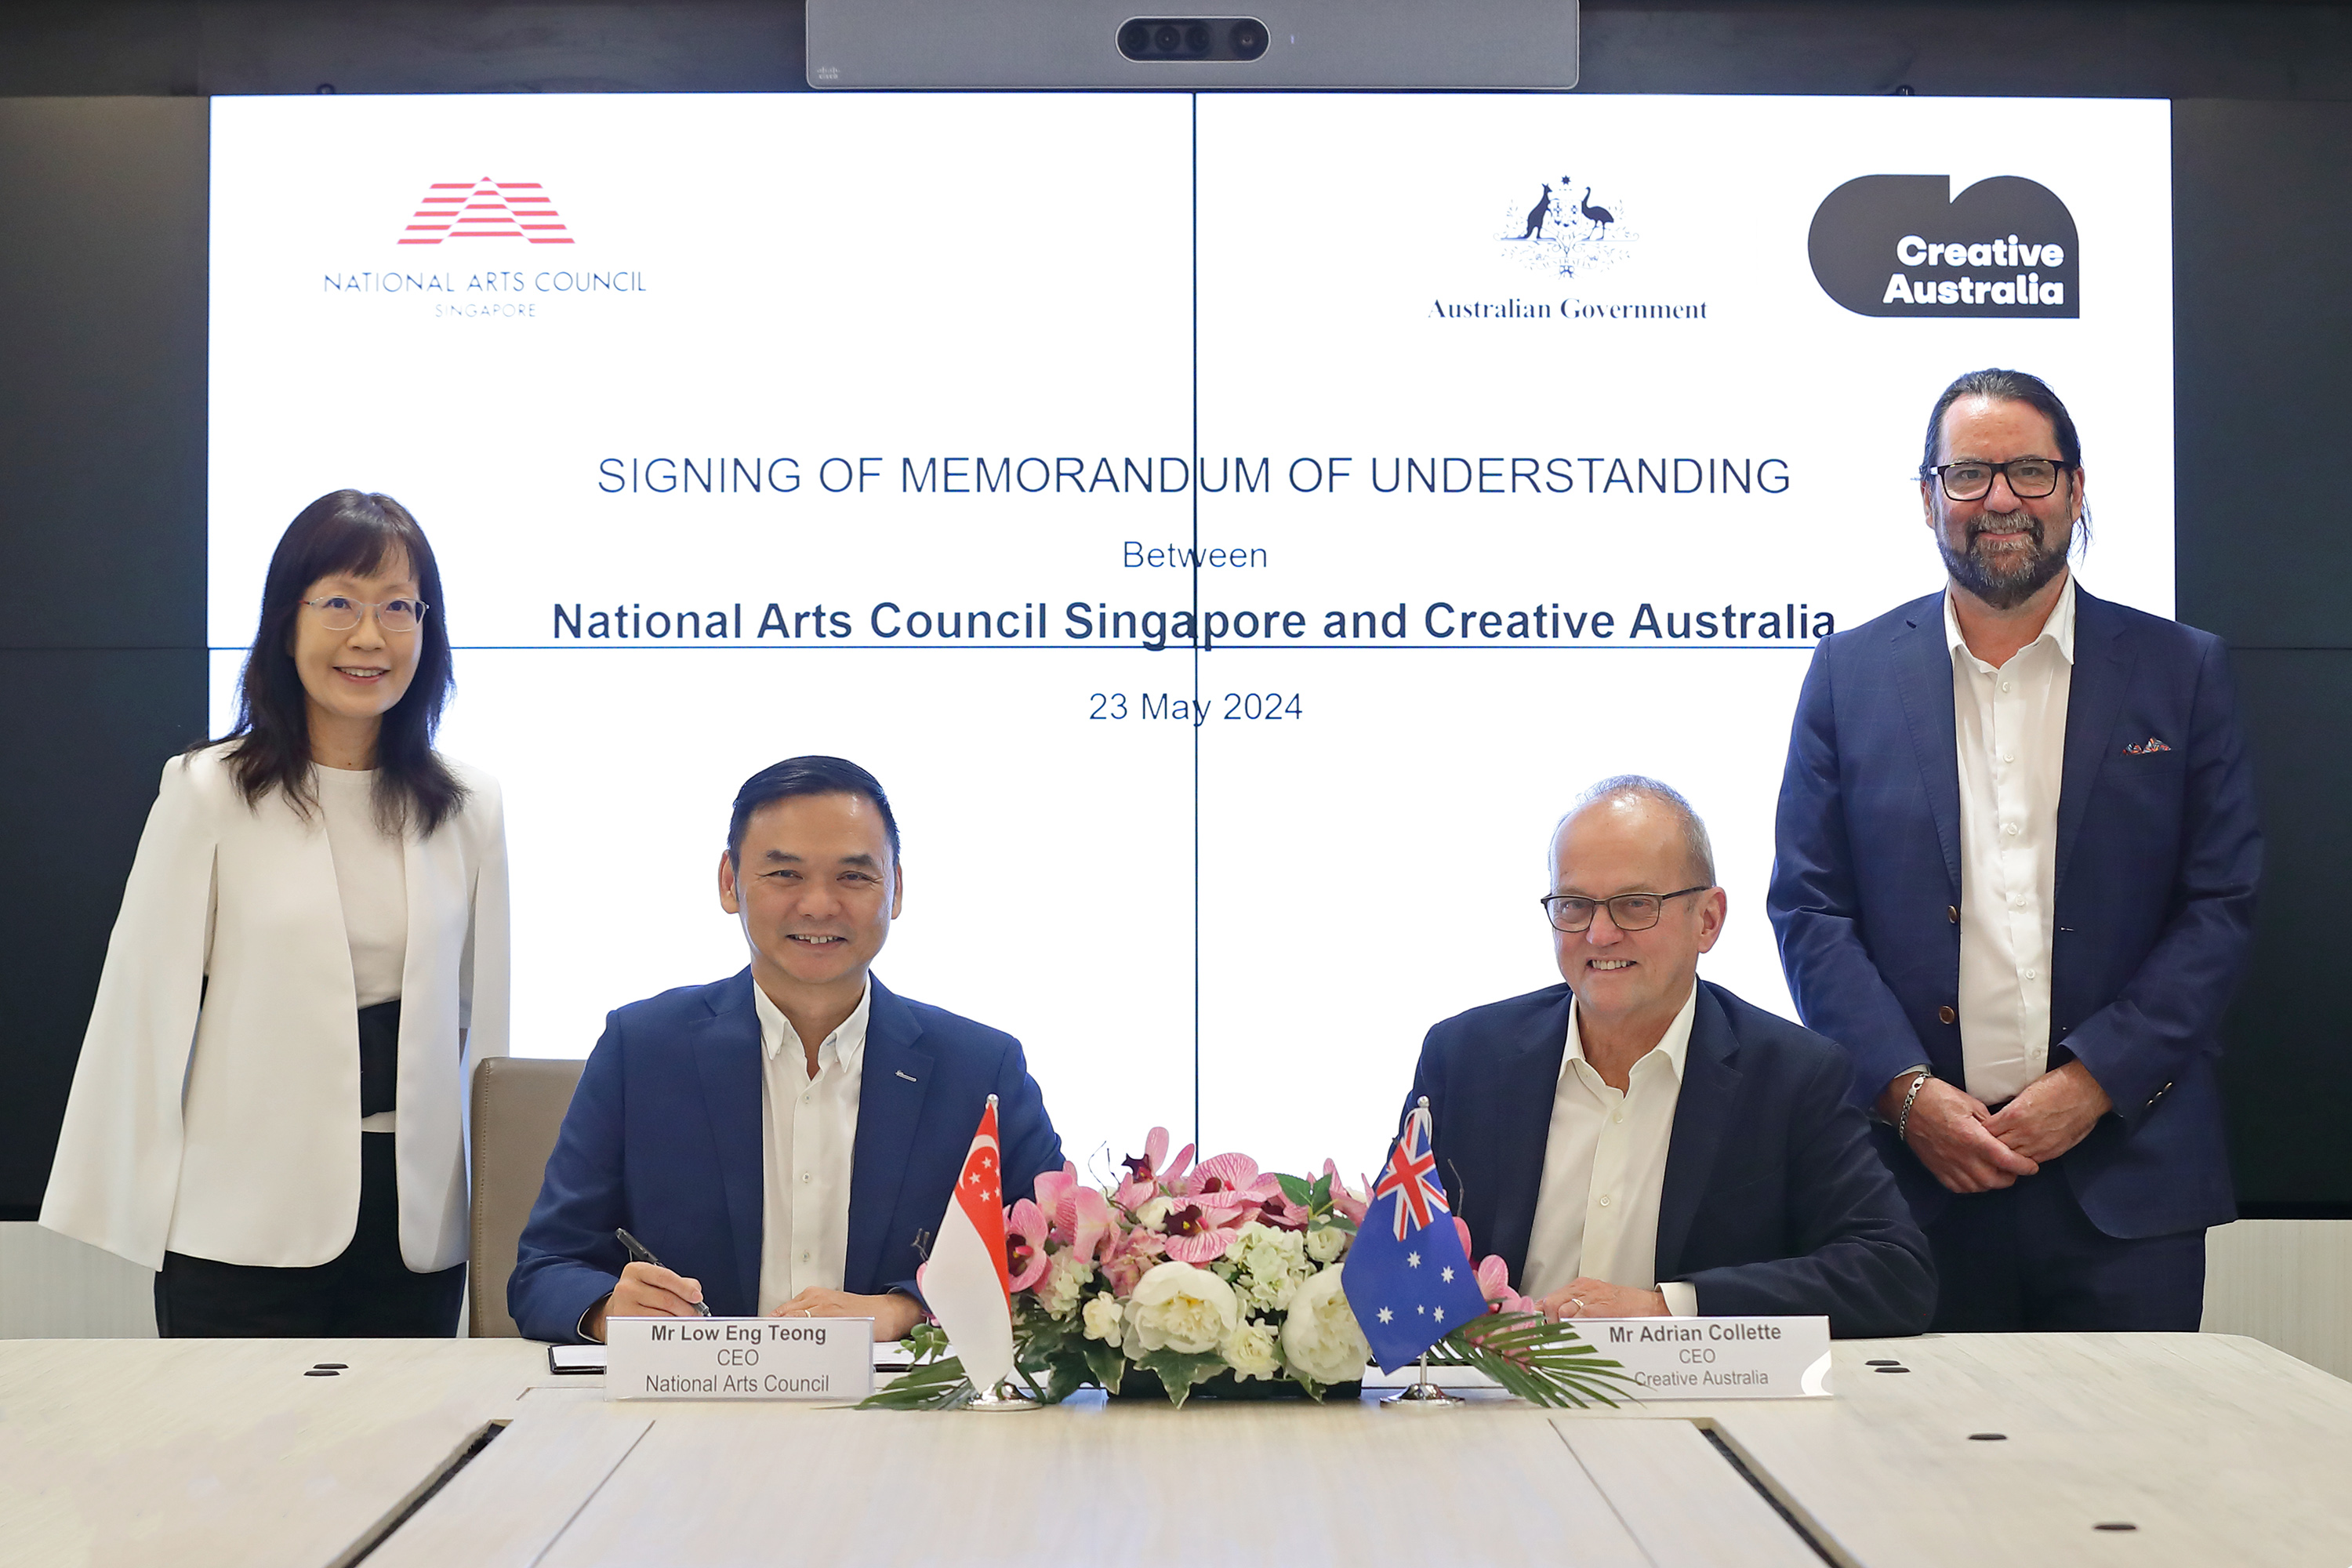 Mr Low Eng Teong, Chief Executive Officer of National Arts Council, Singapore (front left) and Mr Adrian Collette, Chief Executive Officer of Creative Australia (front right) signing the Memorandum of Understanding